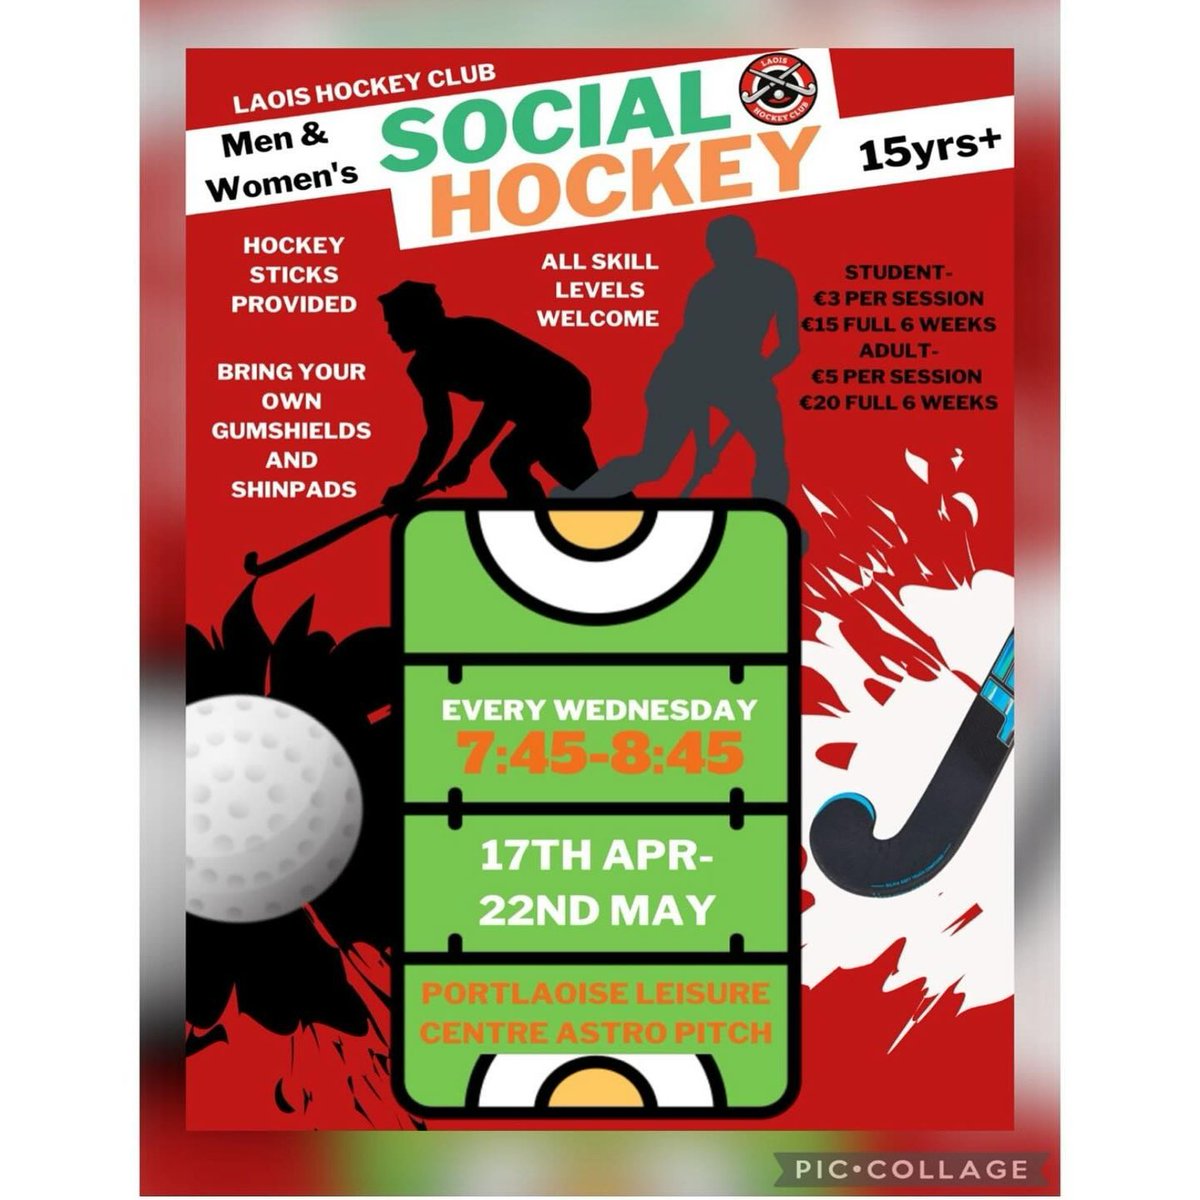 Social Hockey with Laois Hockey Club is back for Week 2 tomorrow evening When: 7:45 - 8:45pm, 17th April - 22nd May Where: Portlaoise Leisure Centre (Astro Pitches) Cost: FREE No previous playing experience is necessary For more information contact Laois Hockey Club